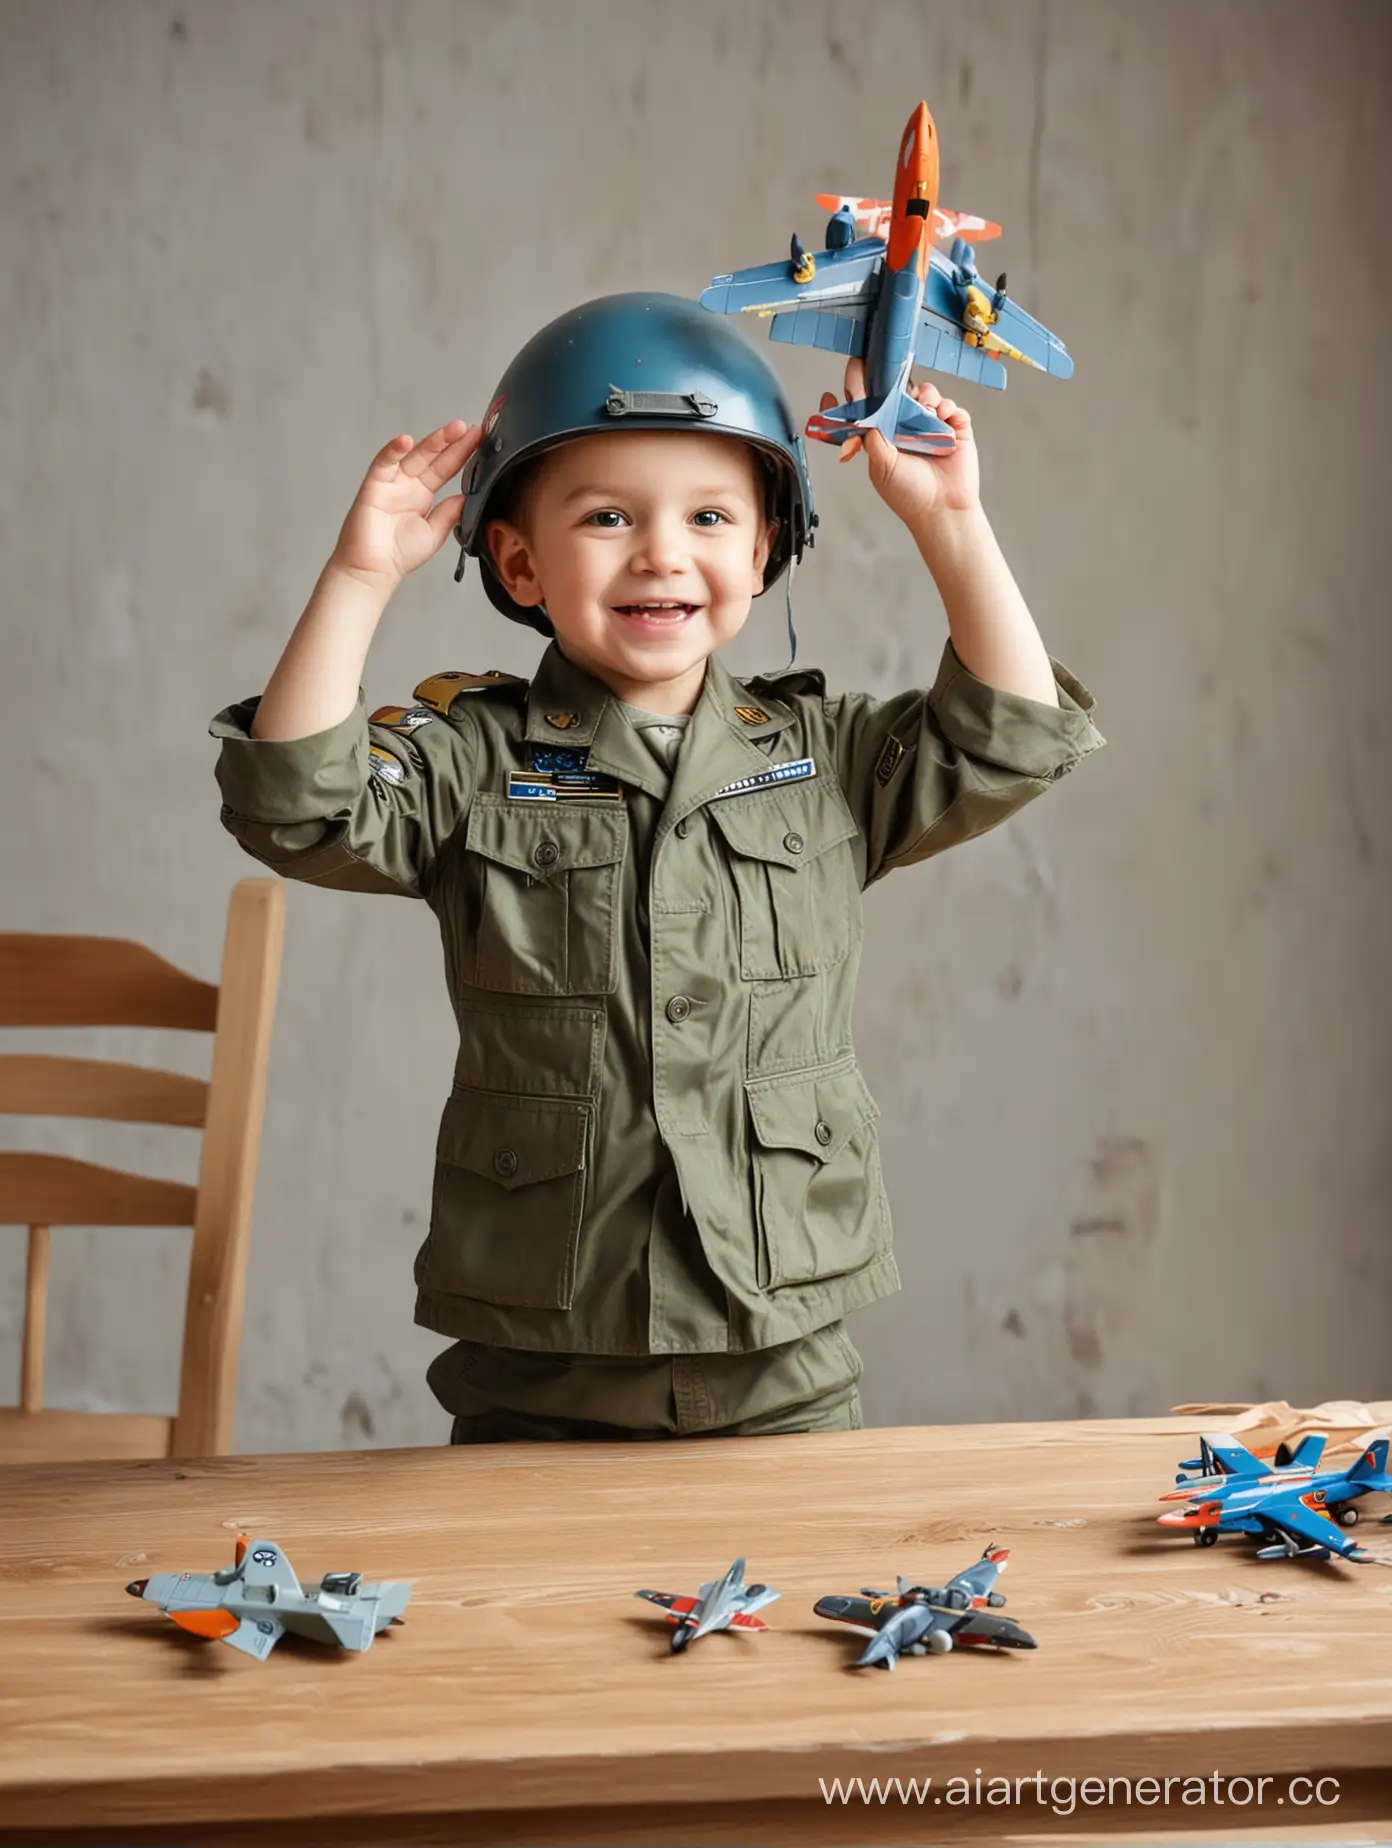 Cheerful-Child-in-Military-Outfit-Displaying-Toy-Airplane